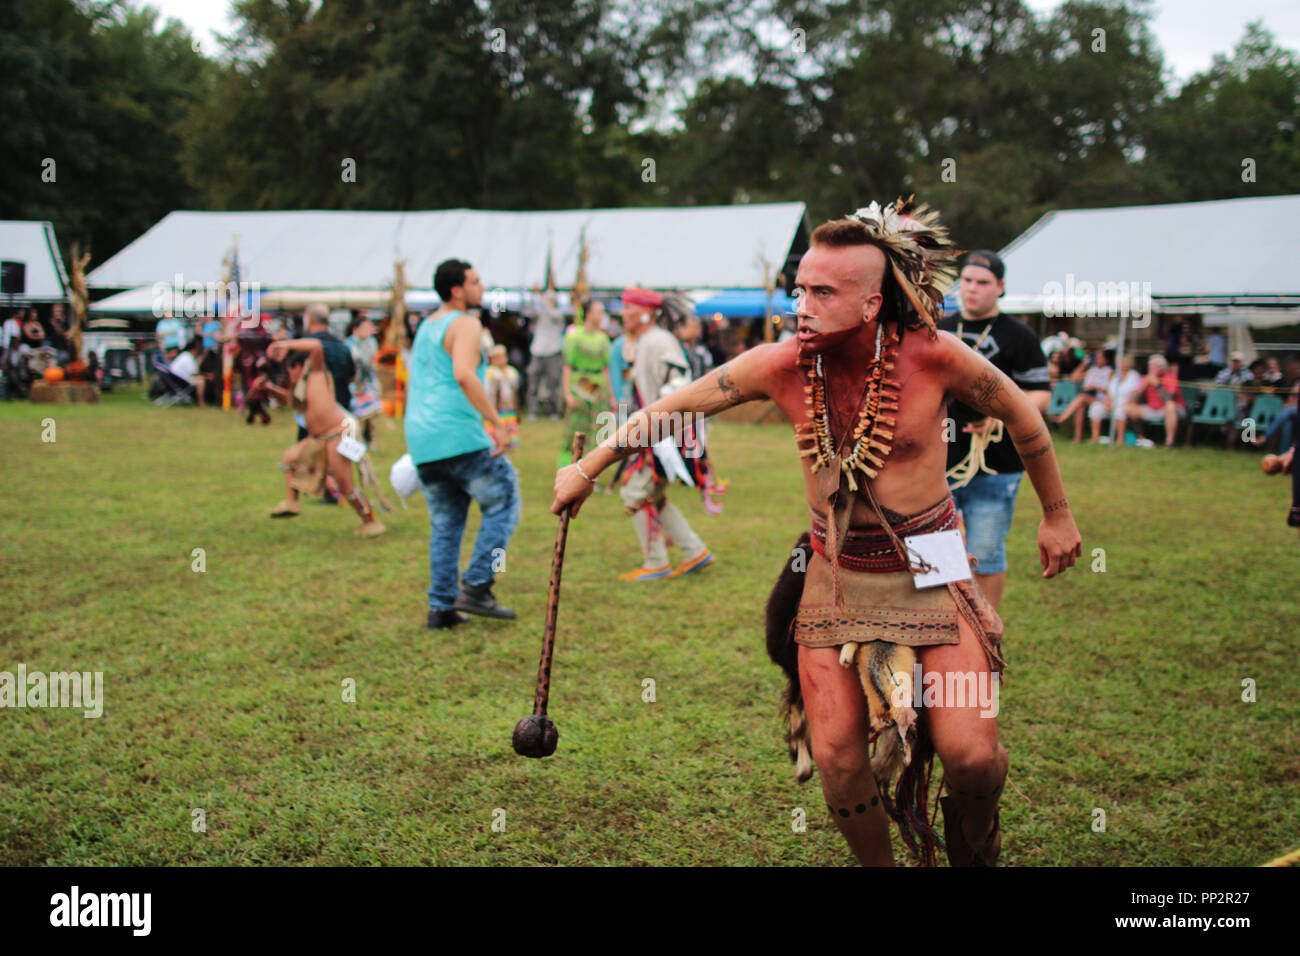 Native American performers dressed in traditional costumes dancing at the Annual Indian Tribe Fall Festival and Pow Wow, Virginia, USA Stock Photo